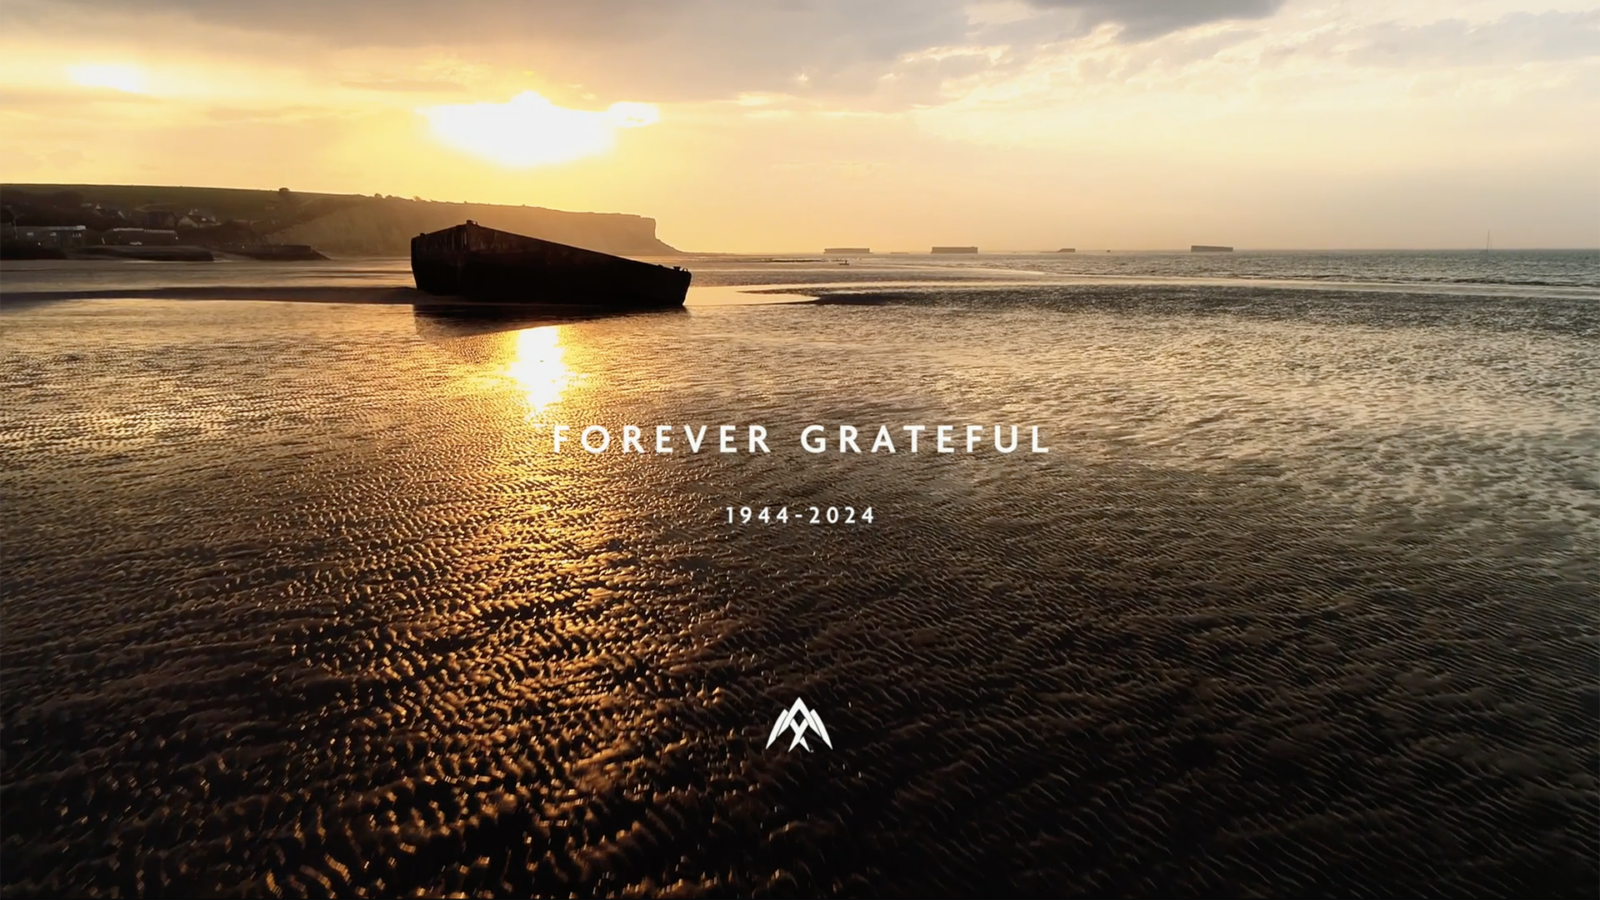 The image shows Gold Beach in Normandy at sunset - main landing site of the British forces on D-Day. Overlaid to the centre of the image are the words 'Forever grateful', with the dates 1944 - 2024 below. In the lower part of the image is the AERALIS logo in white.